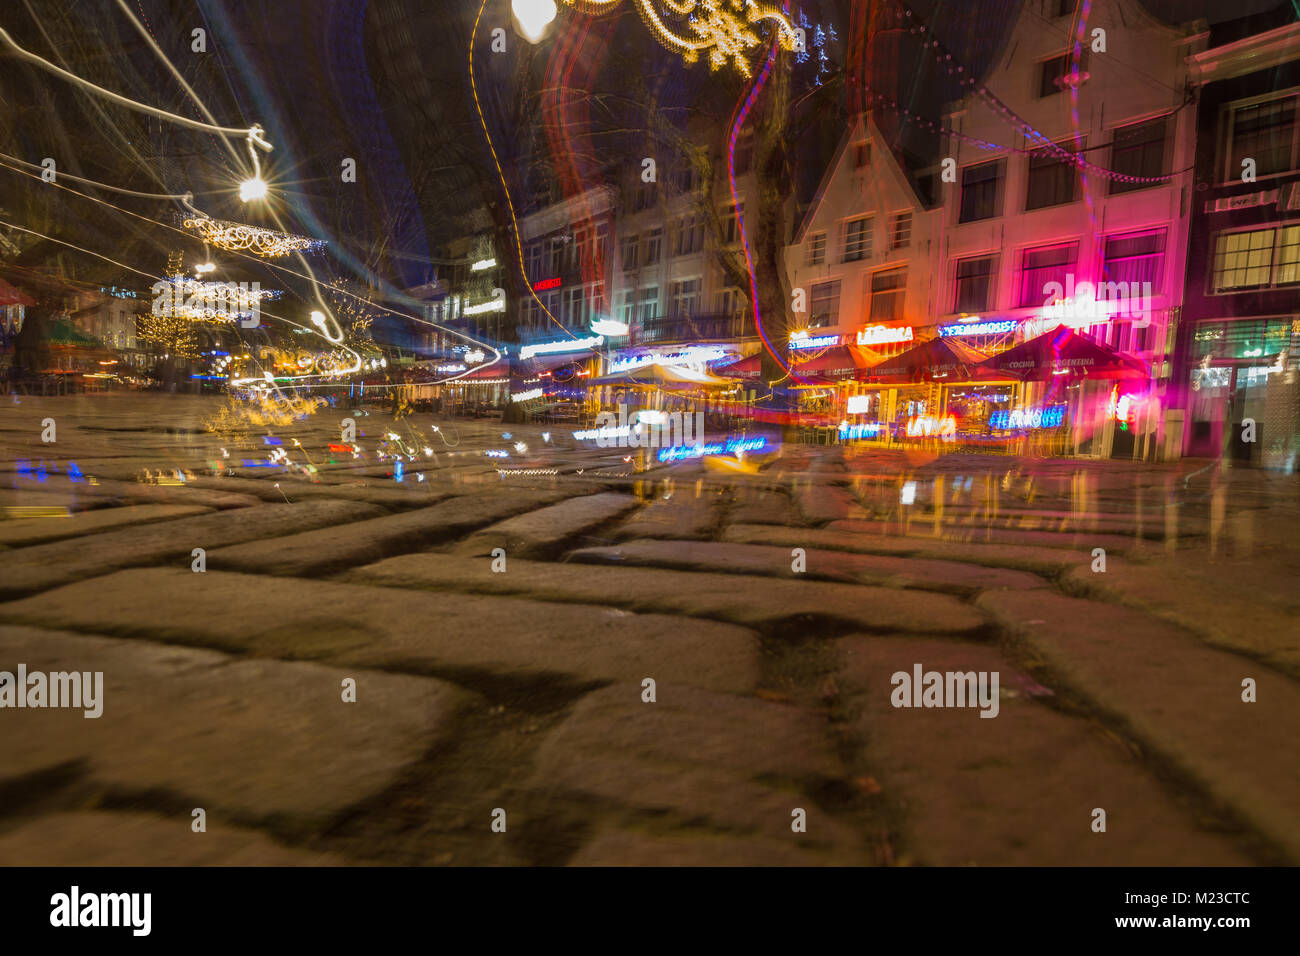 Impression of a drunk's night out in Amsterdam. Blurred neon signs with double vision, fallen down on pavement. Stock Photo